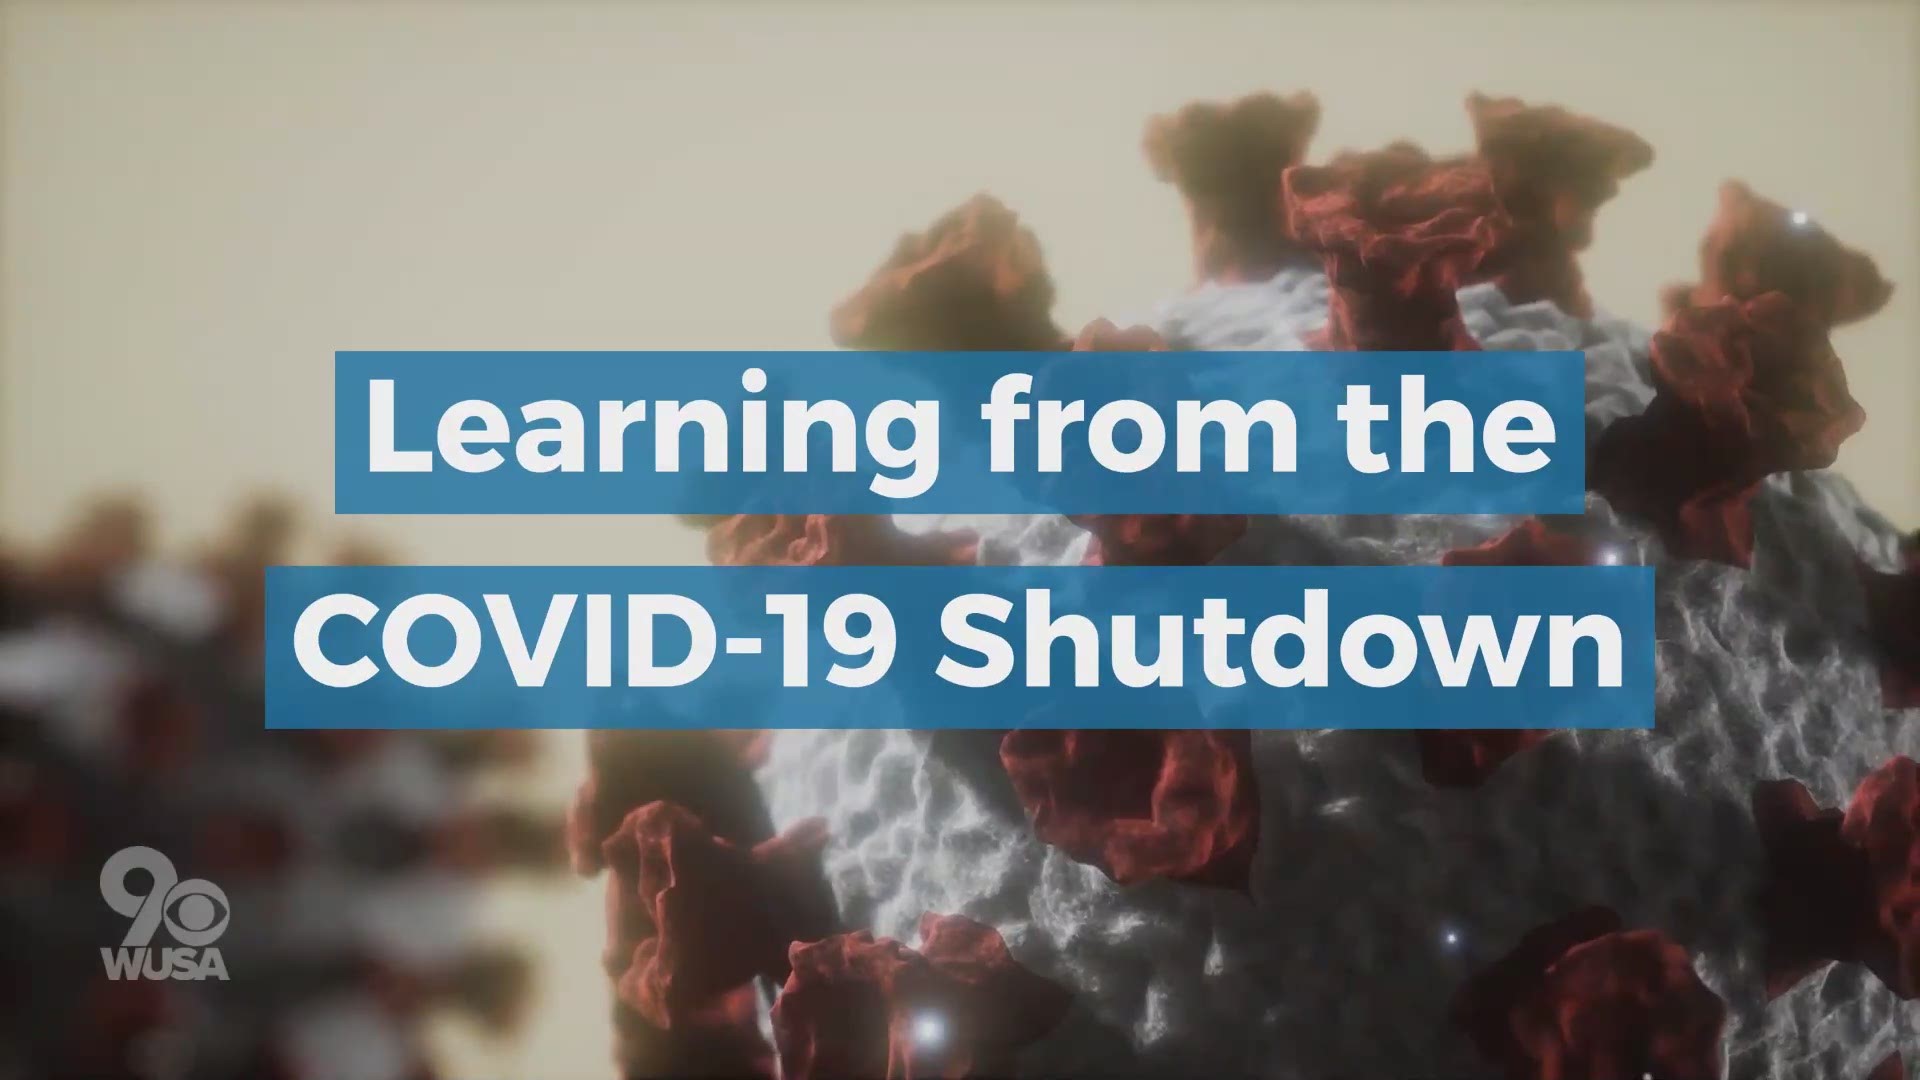 Rather than being a waste of time, there are some very essential things we can learn from our COVID-19 shutdown experience.